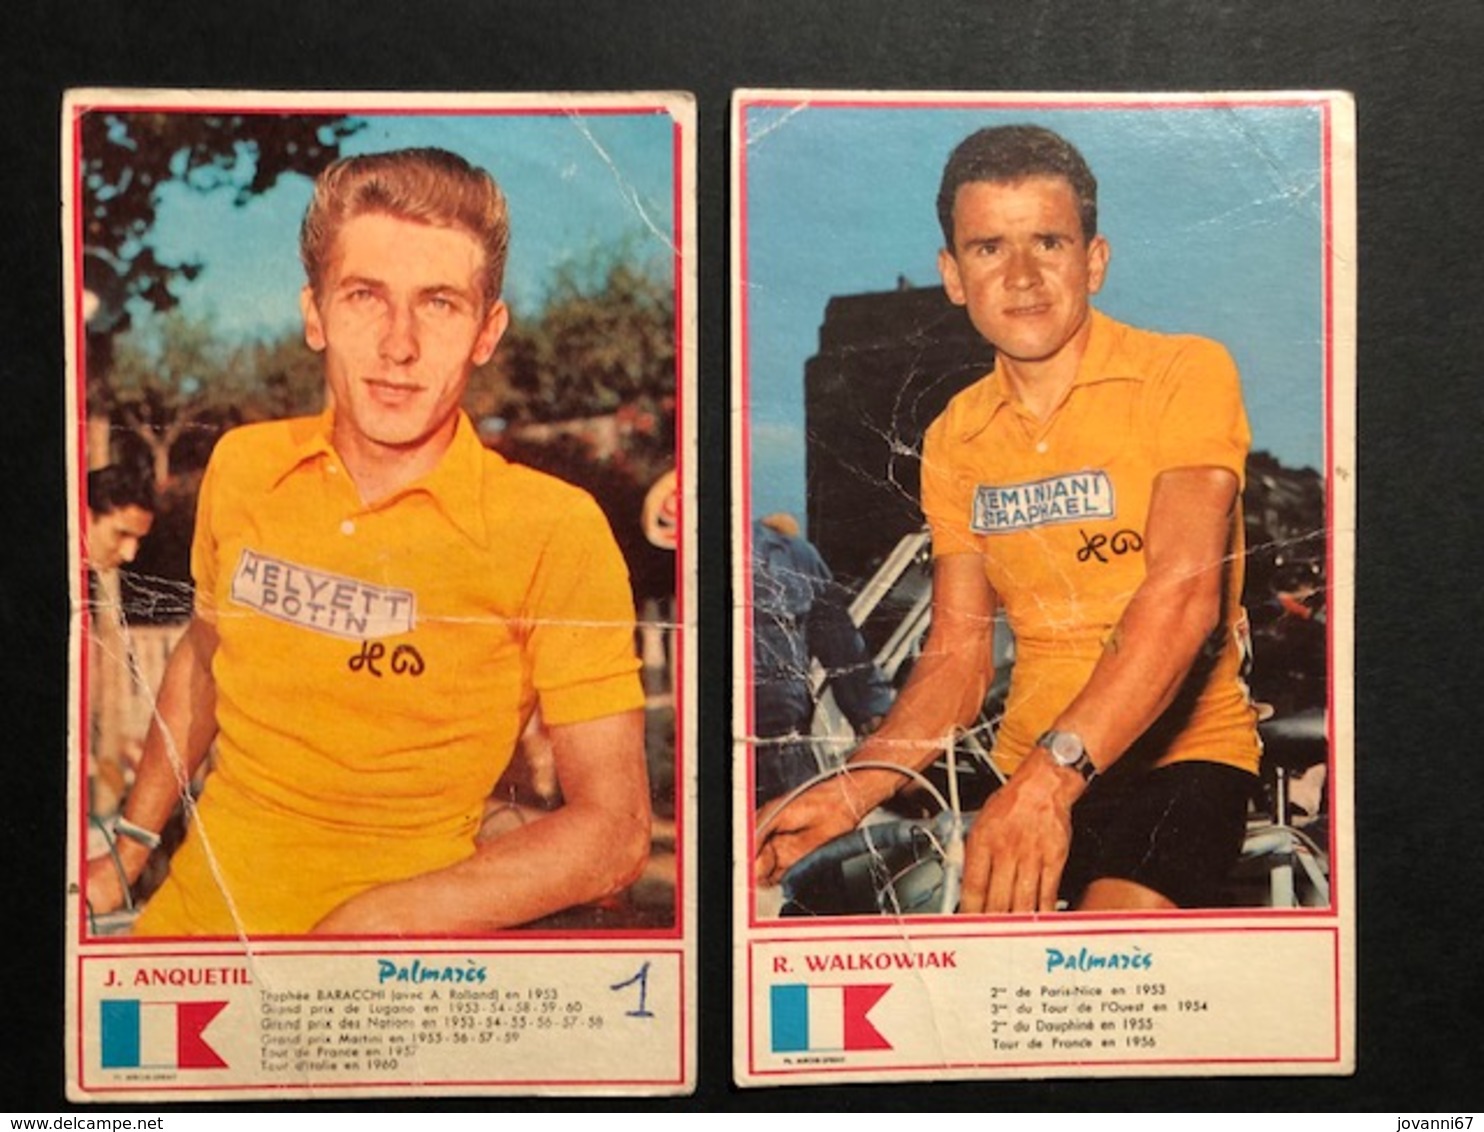 Cartes / Cards - Anquetil + Walkowiak  -  Cyclists - Cyclisme - Ciclismo -wielrennen - Wielrennen